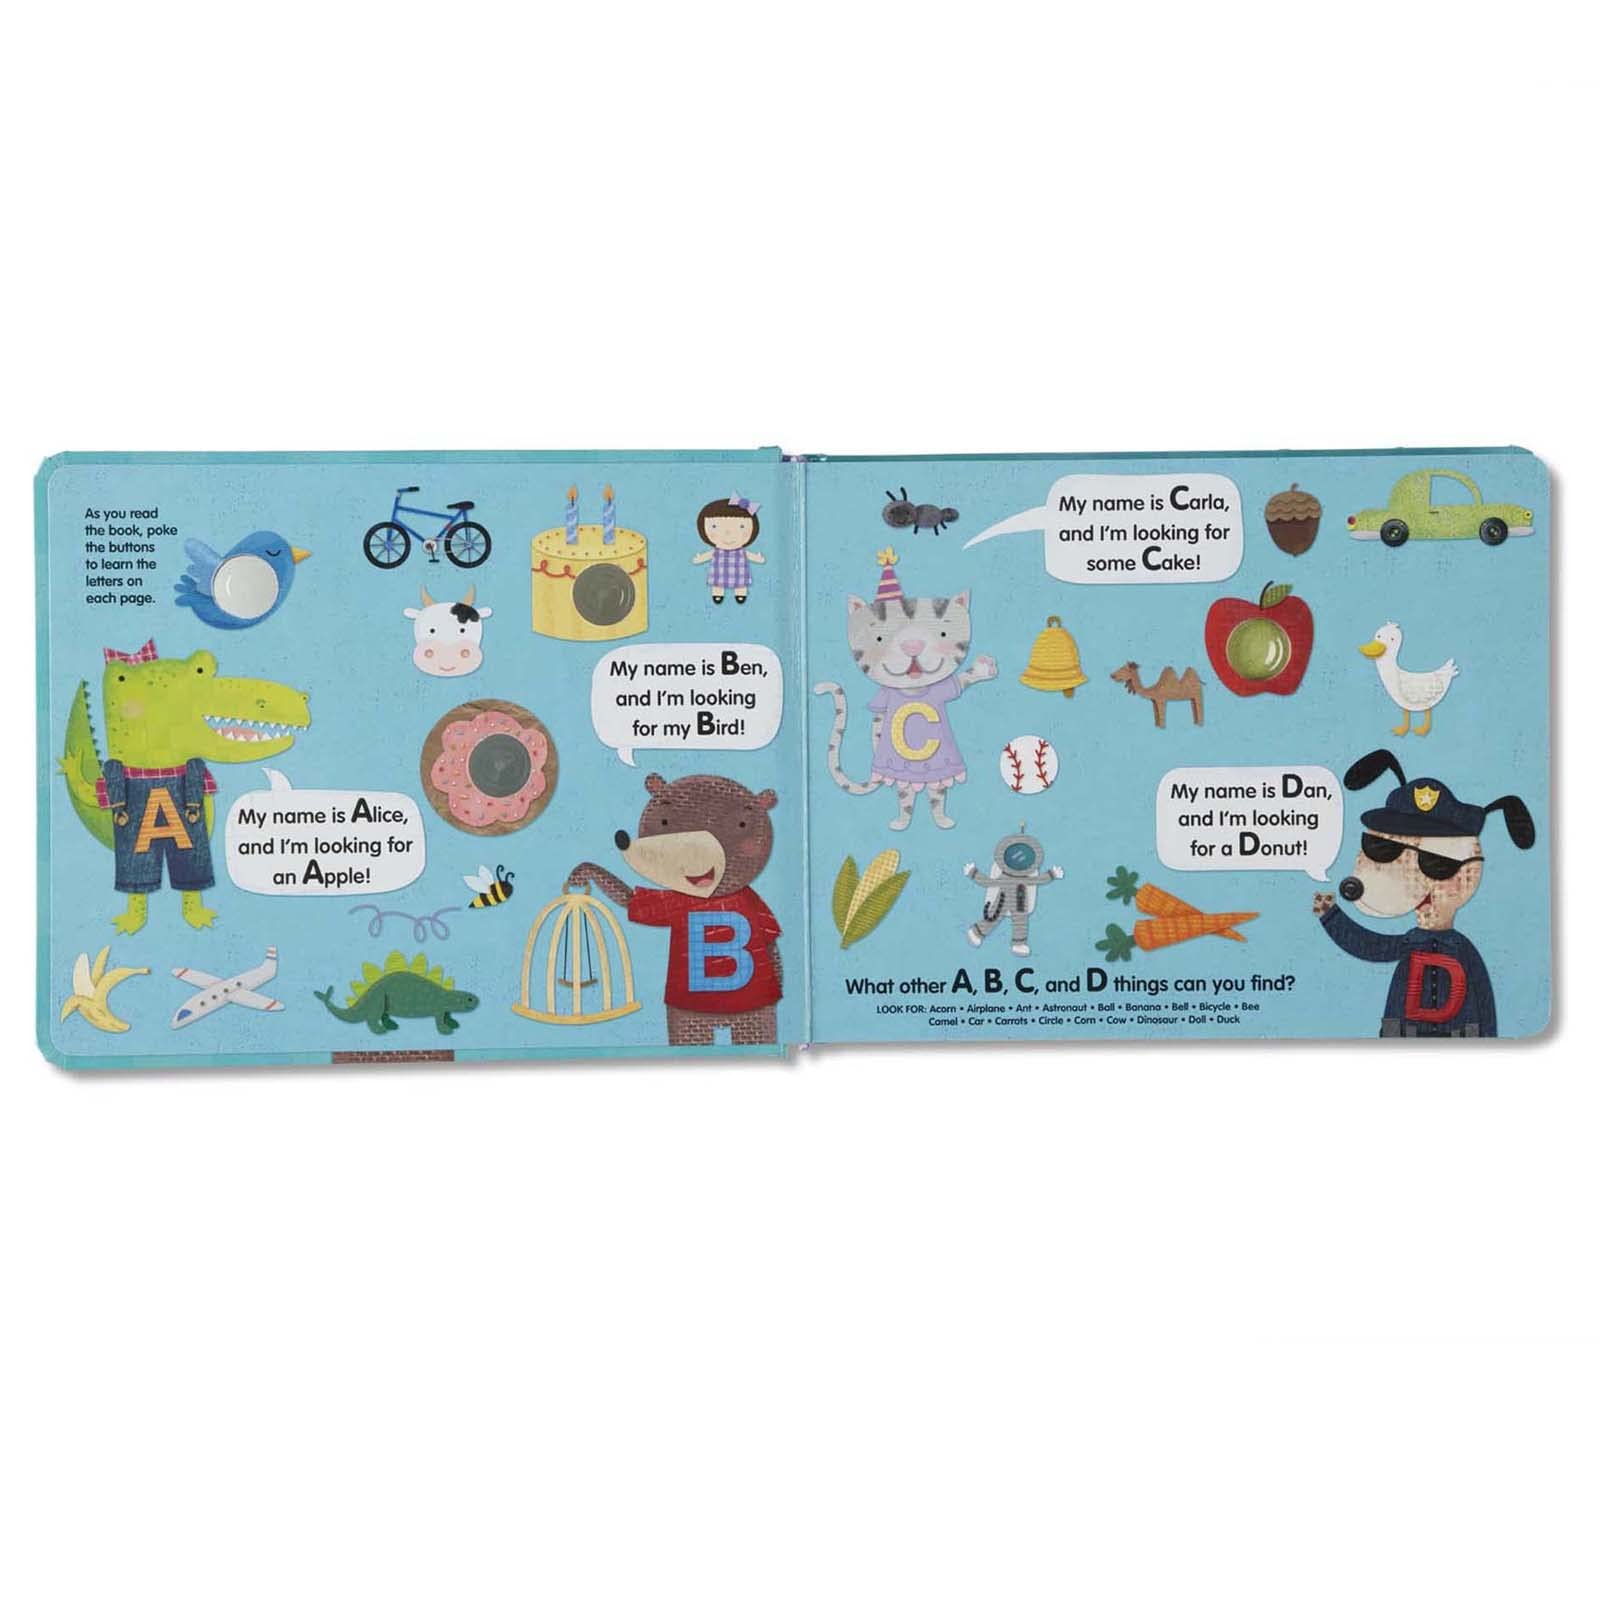 Melissa & Doug Children's Book - Poke-a-Dot: An Alphabet Eye Spy (Board Book with Buttons to Pop) - Alphabet Pop It Book, Push Pop Book For Toddlers And Kids Ages 3+